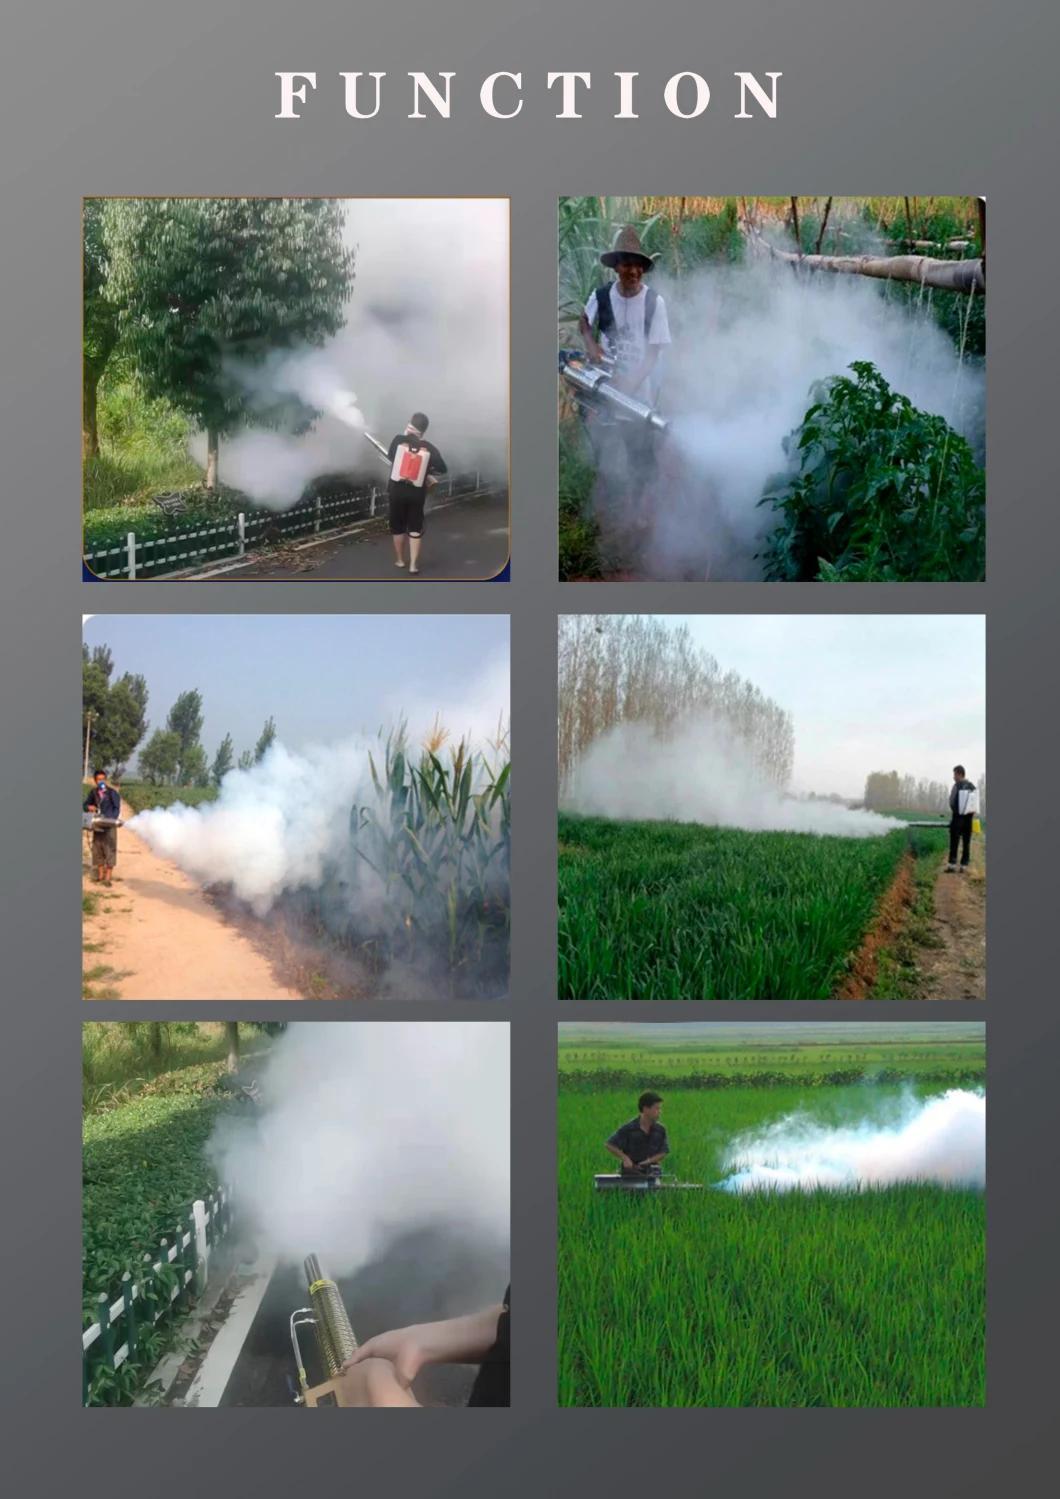 Wholesale Portable Fogging Machine Agriculture for Public Area with Full Stainless Teel Materials